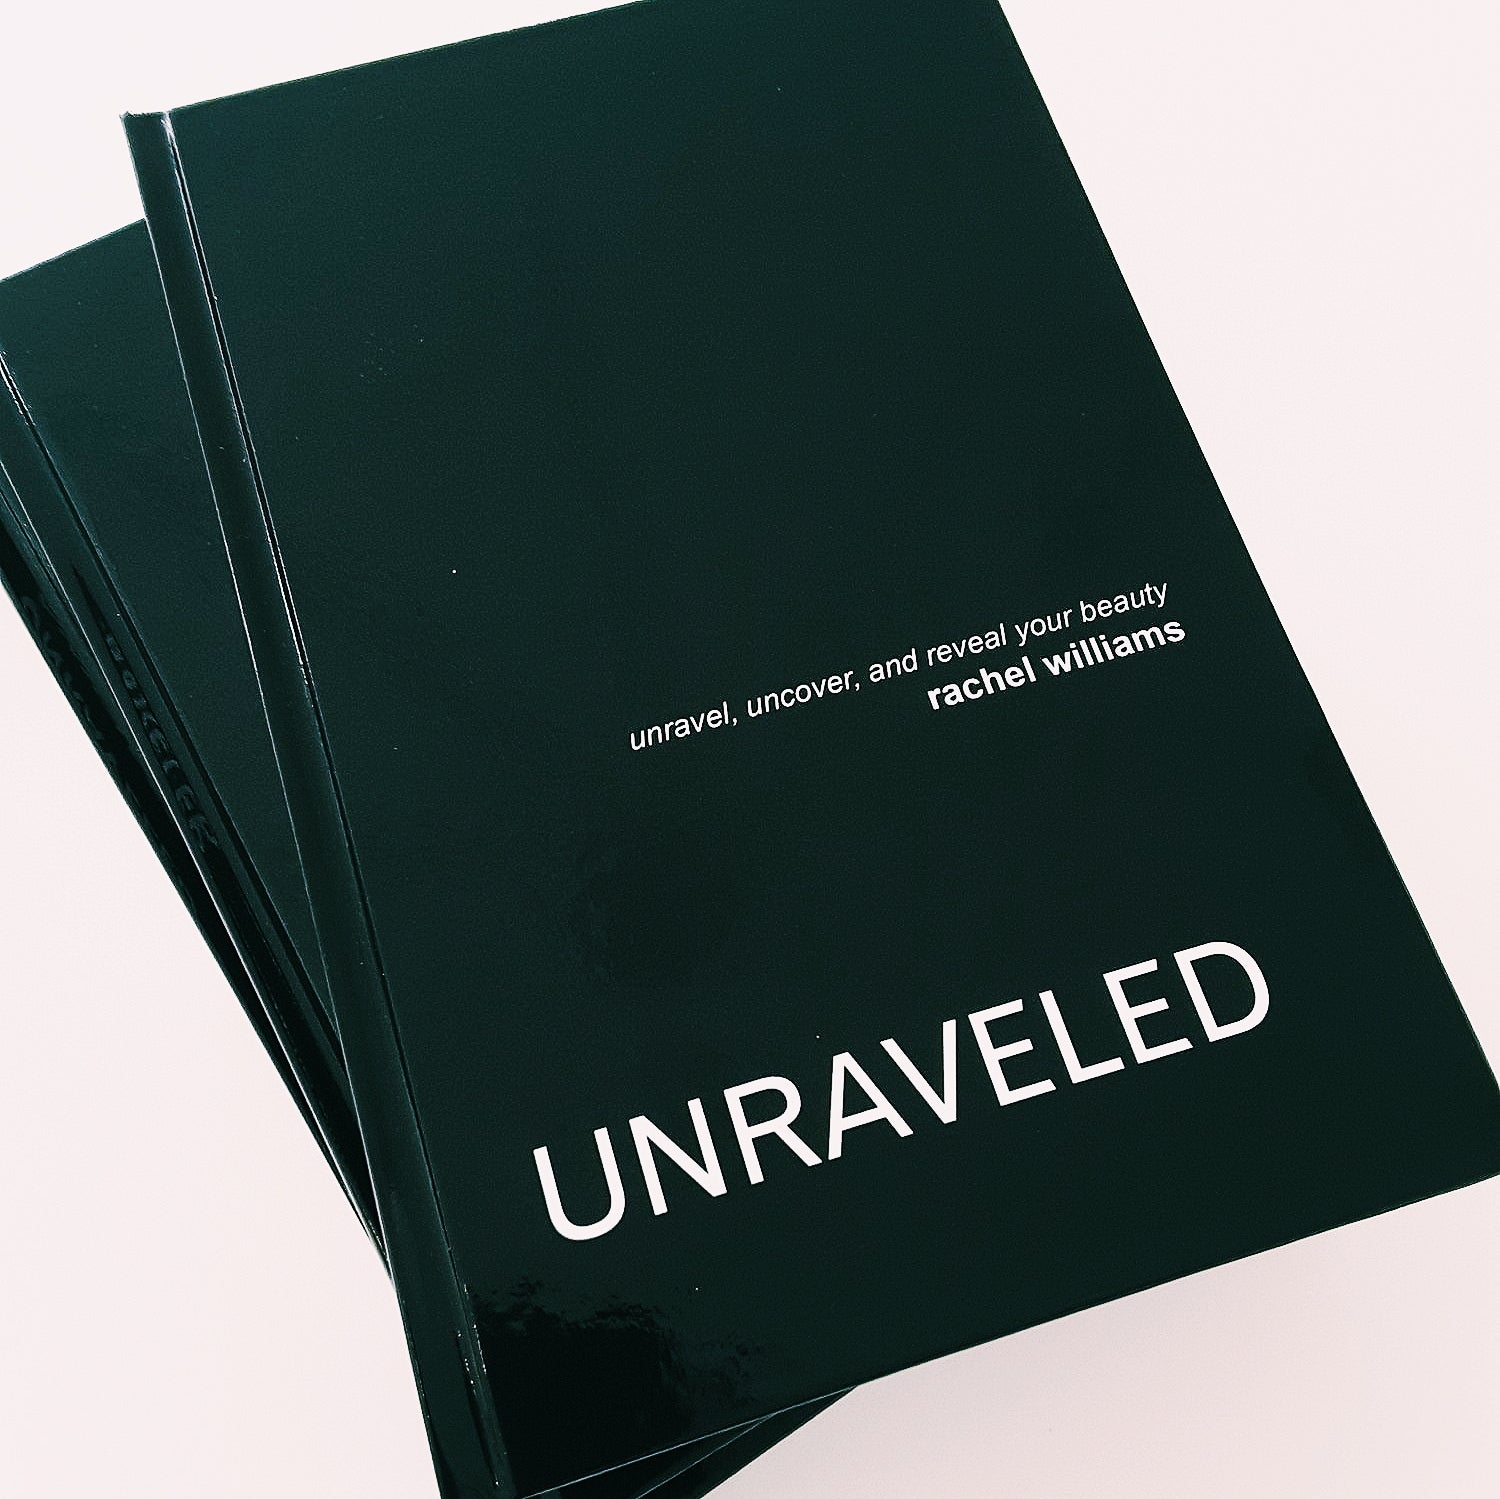 
  
  Unraveled - unravel, uncover and reveal your beauty
  
